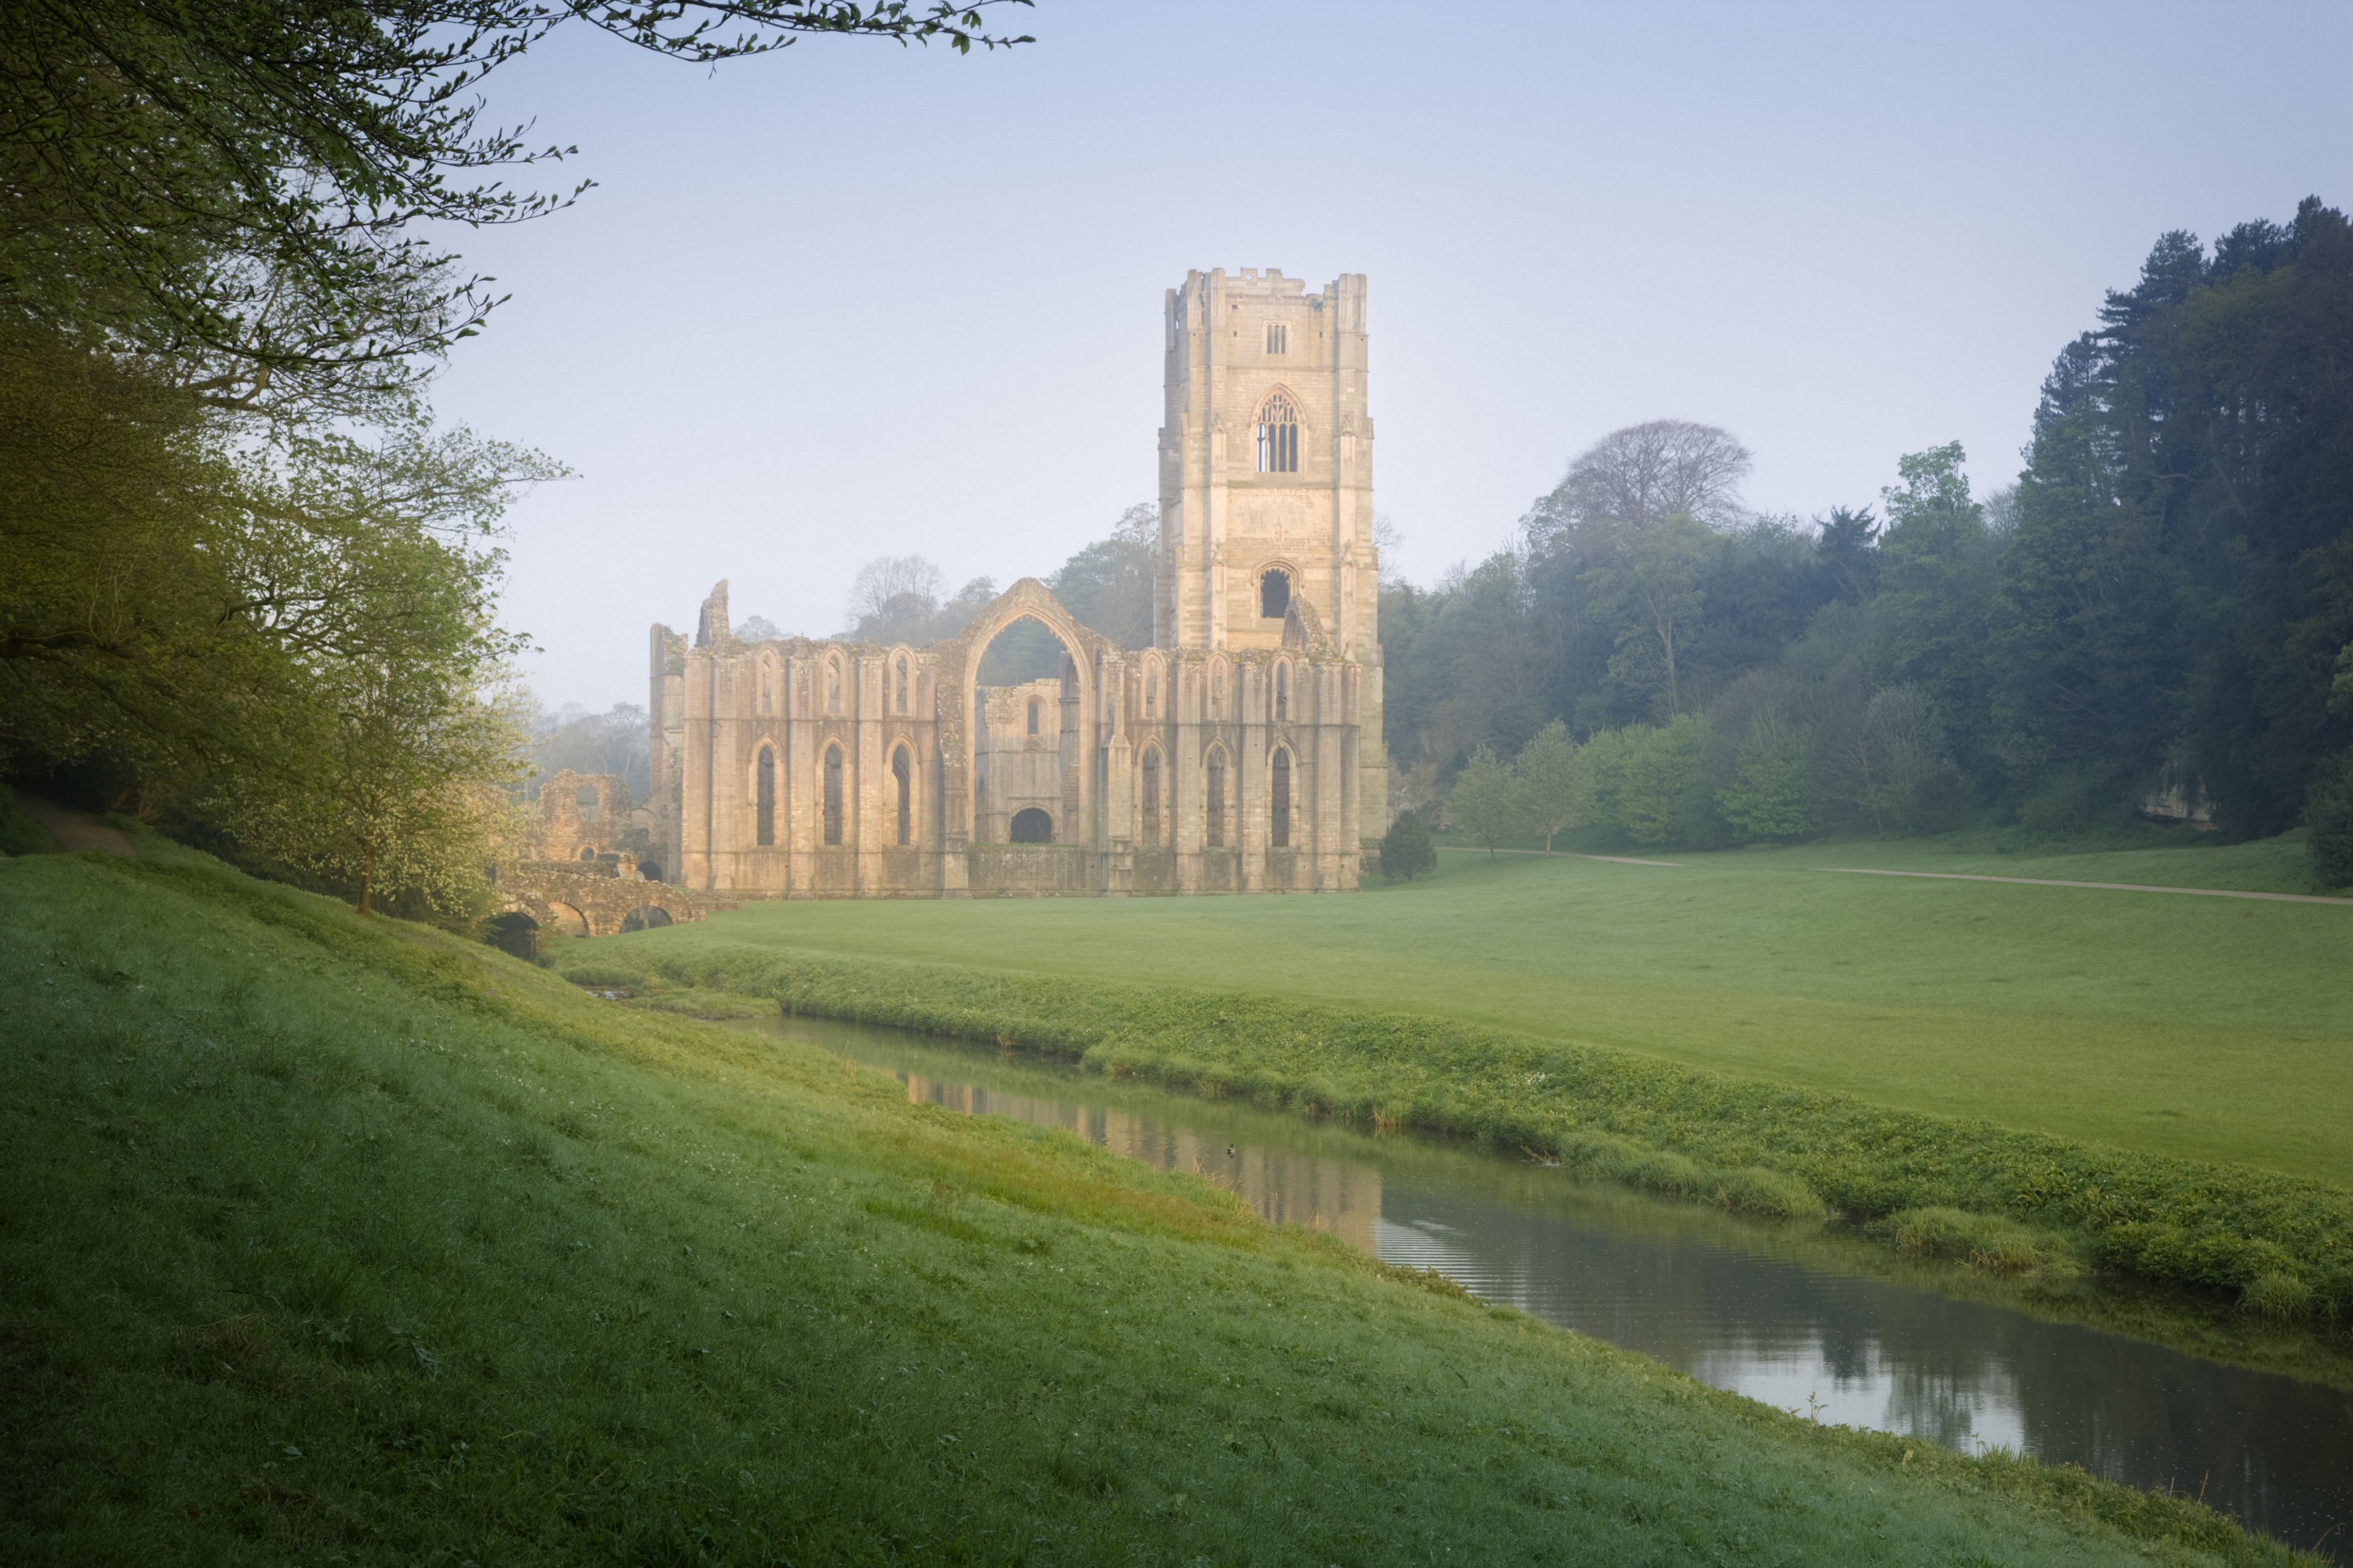 A view along the River Skell towards Fountains Abbey, North Yorkshire, largest monastic ruin in the UK.